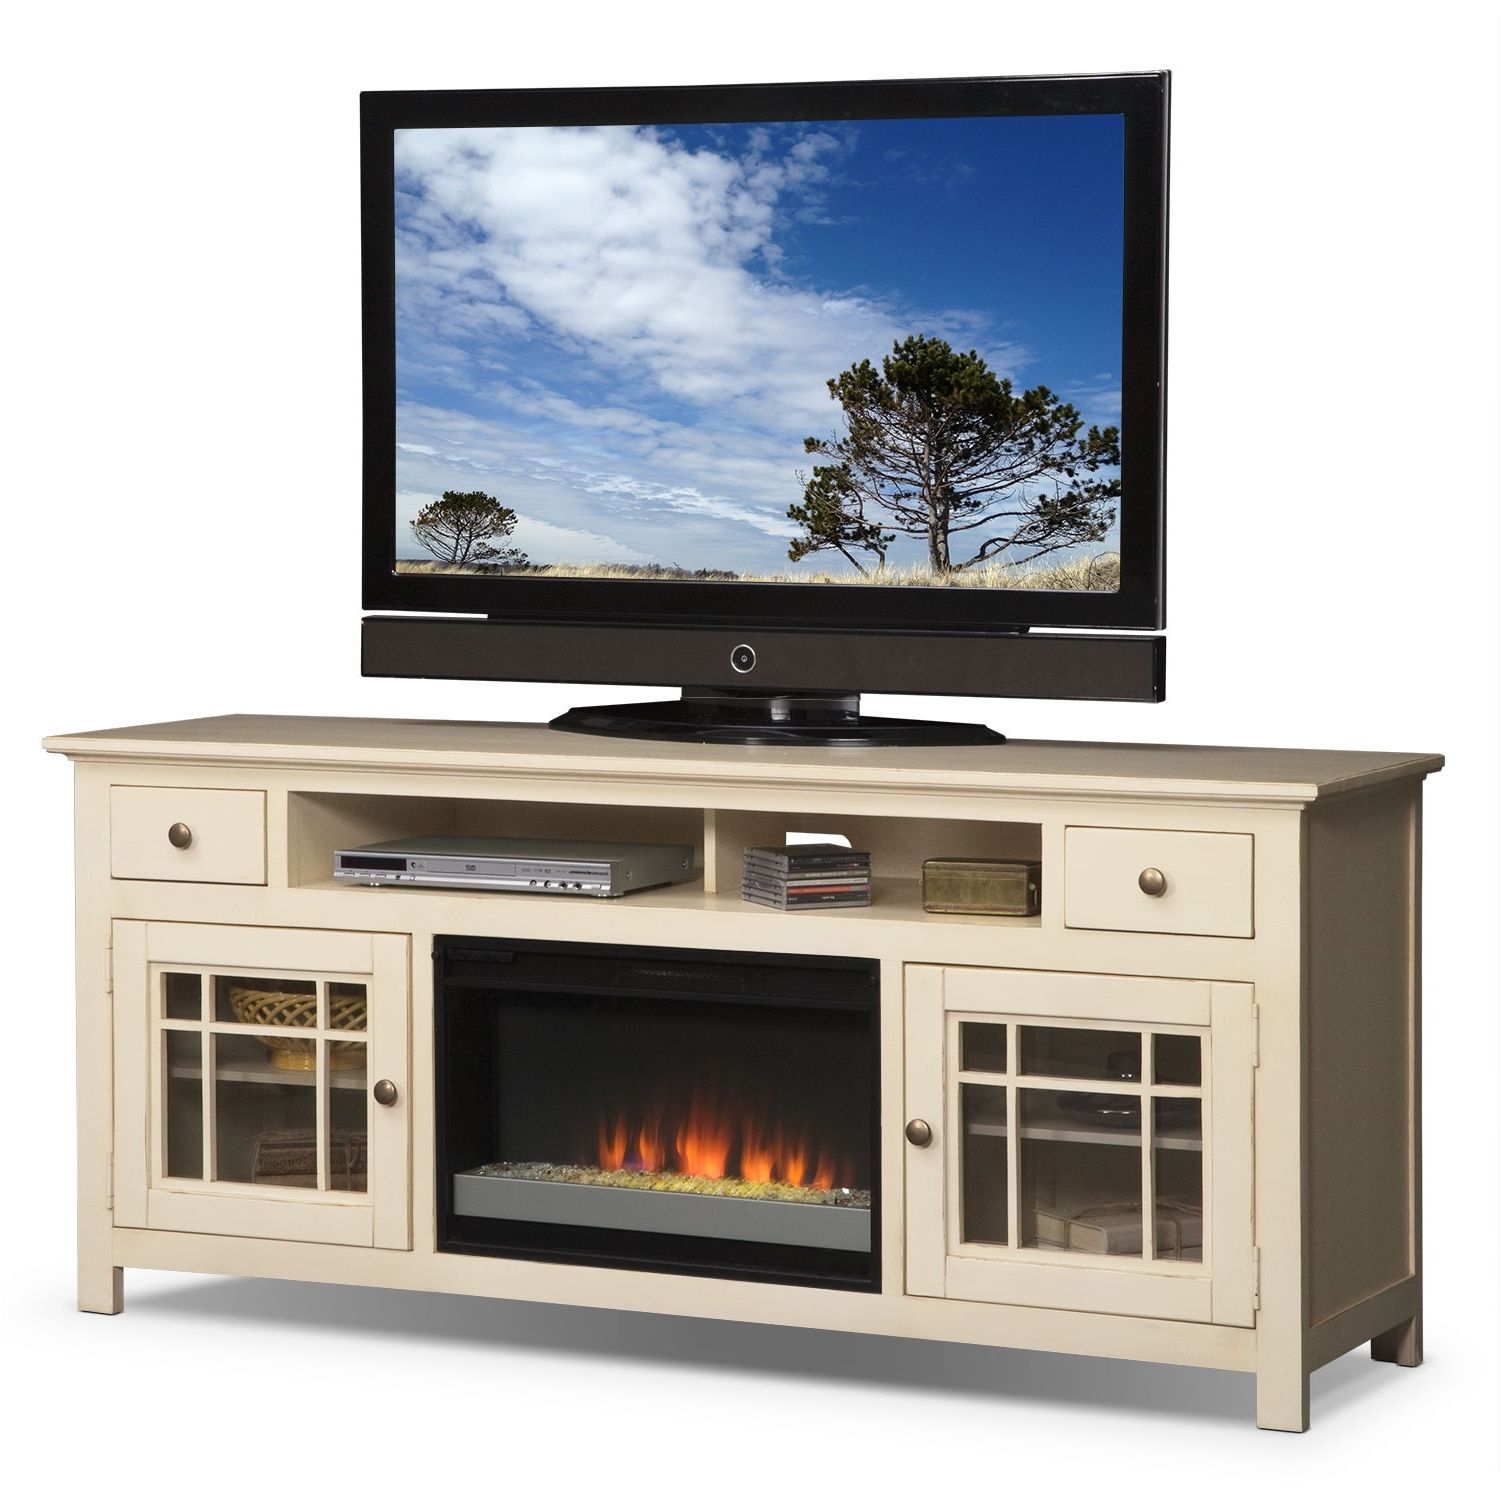 Latest Tv Stand With Fireplace Big Lots On Sale Electric Stands And Bayside Pertaining To Big Lots Tv Stands (Photo 1 of 20)